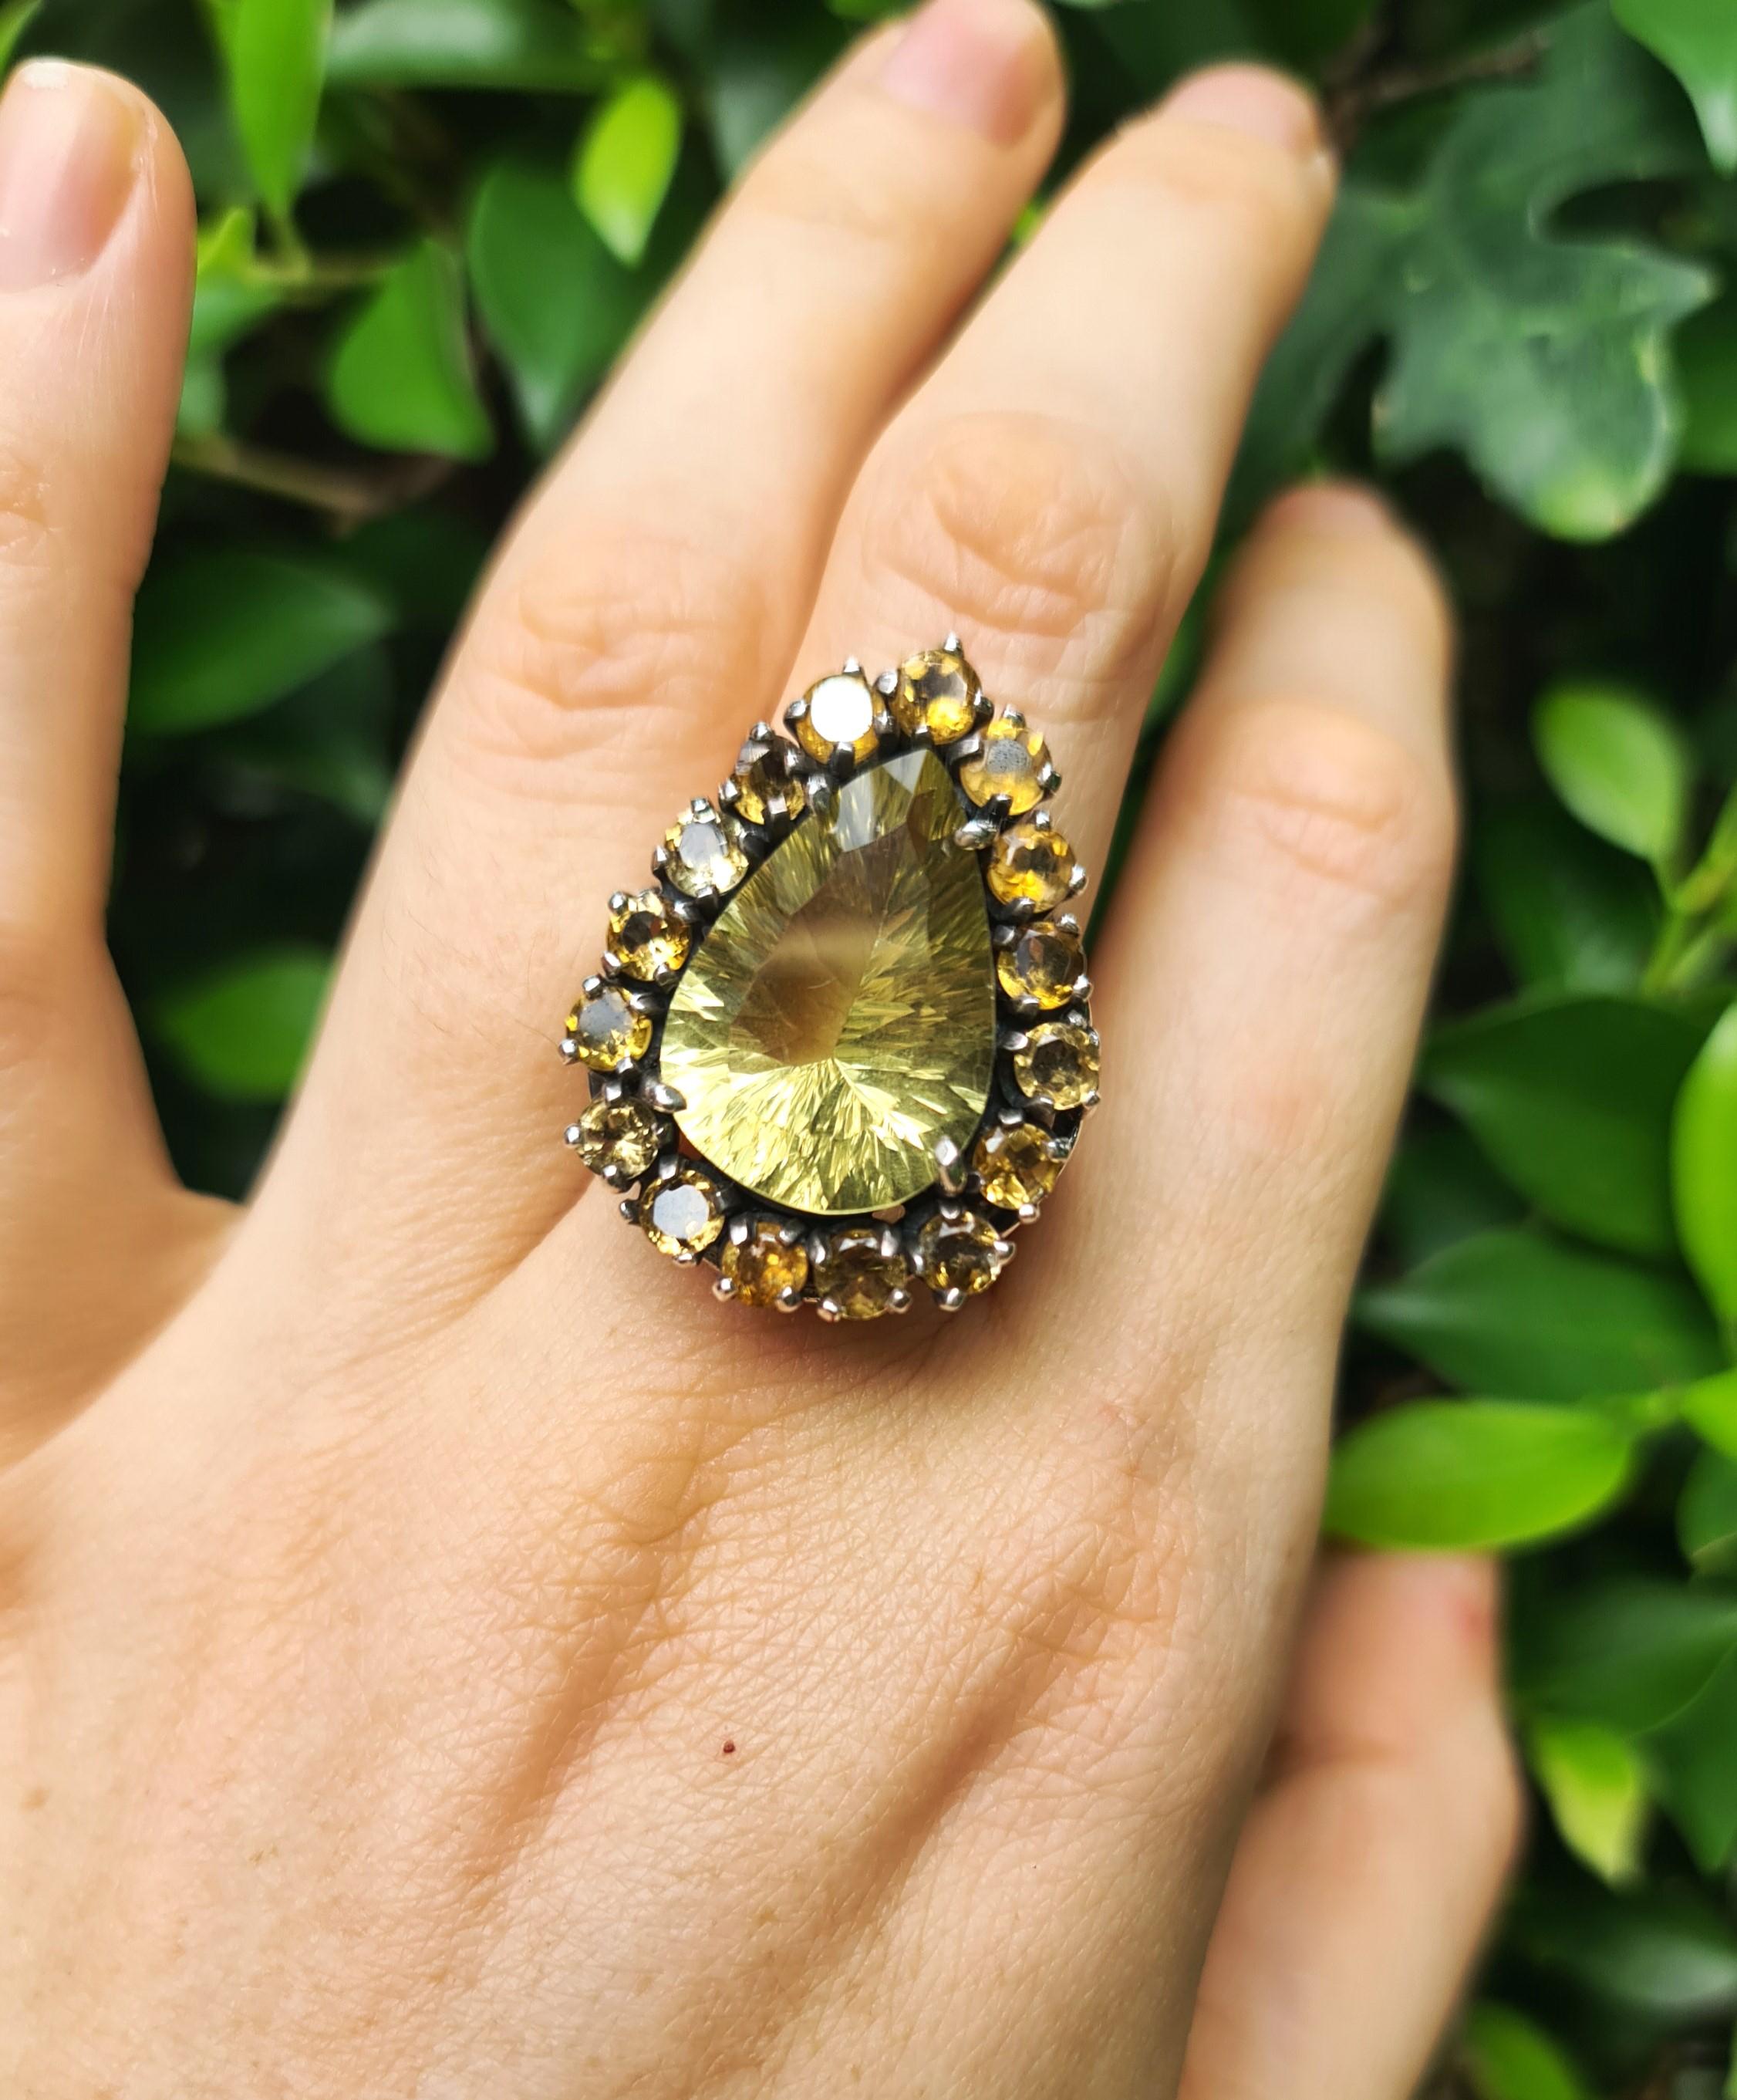 925 Sterling Silver Ring with large pear shape lemon quartz in the middle and citrine gemstones around.

The ring size is 7 1/4 US
Please, request your size. We can resize any size for you.

The size of the pear shape Lemon Quartz stone is 15×22